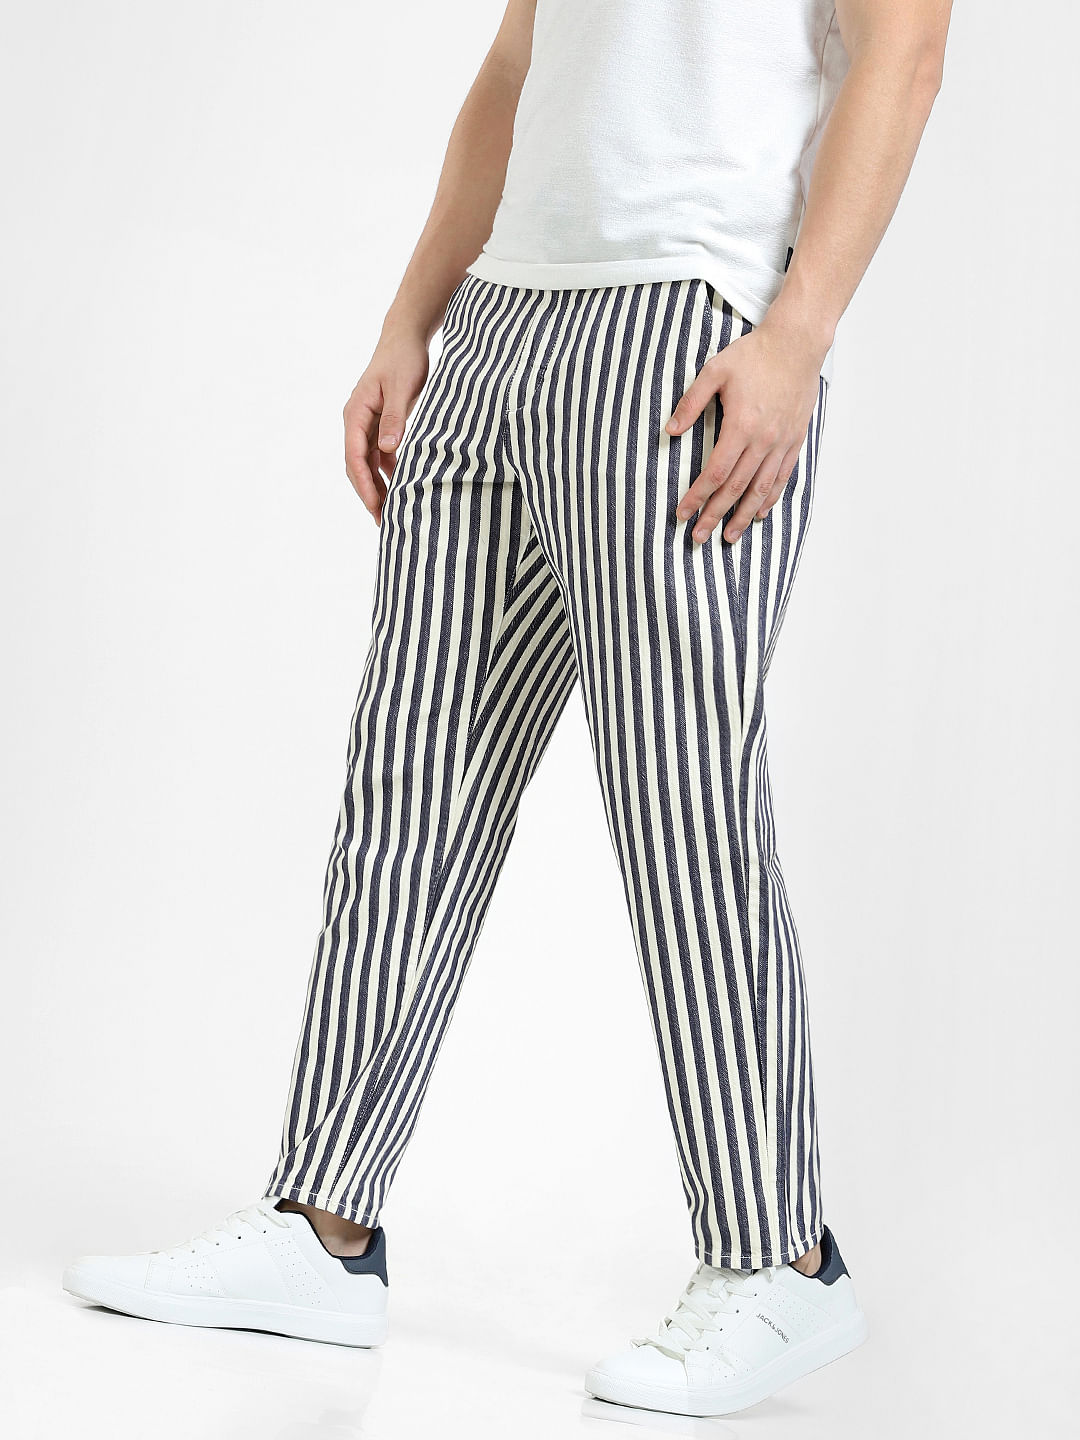 Men Vertical Striped Tapered Pants  Stripe pants outfit Mens outfits Mens  pants